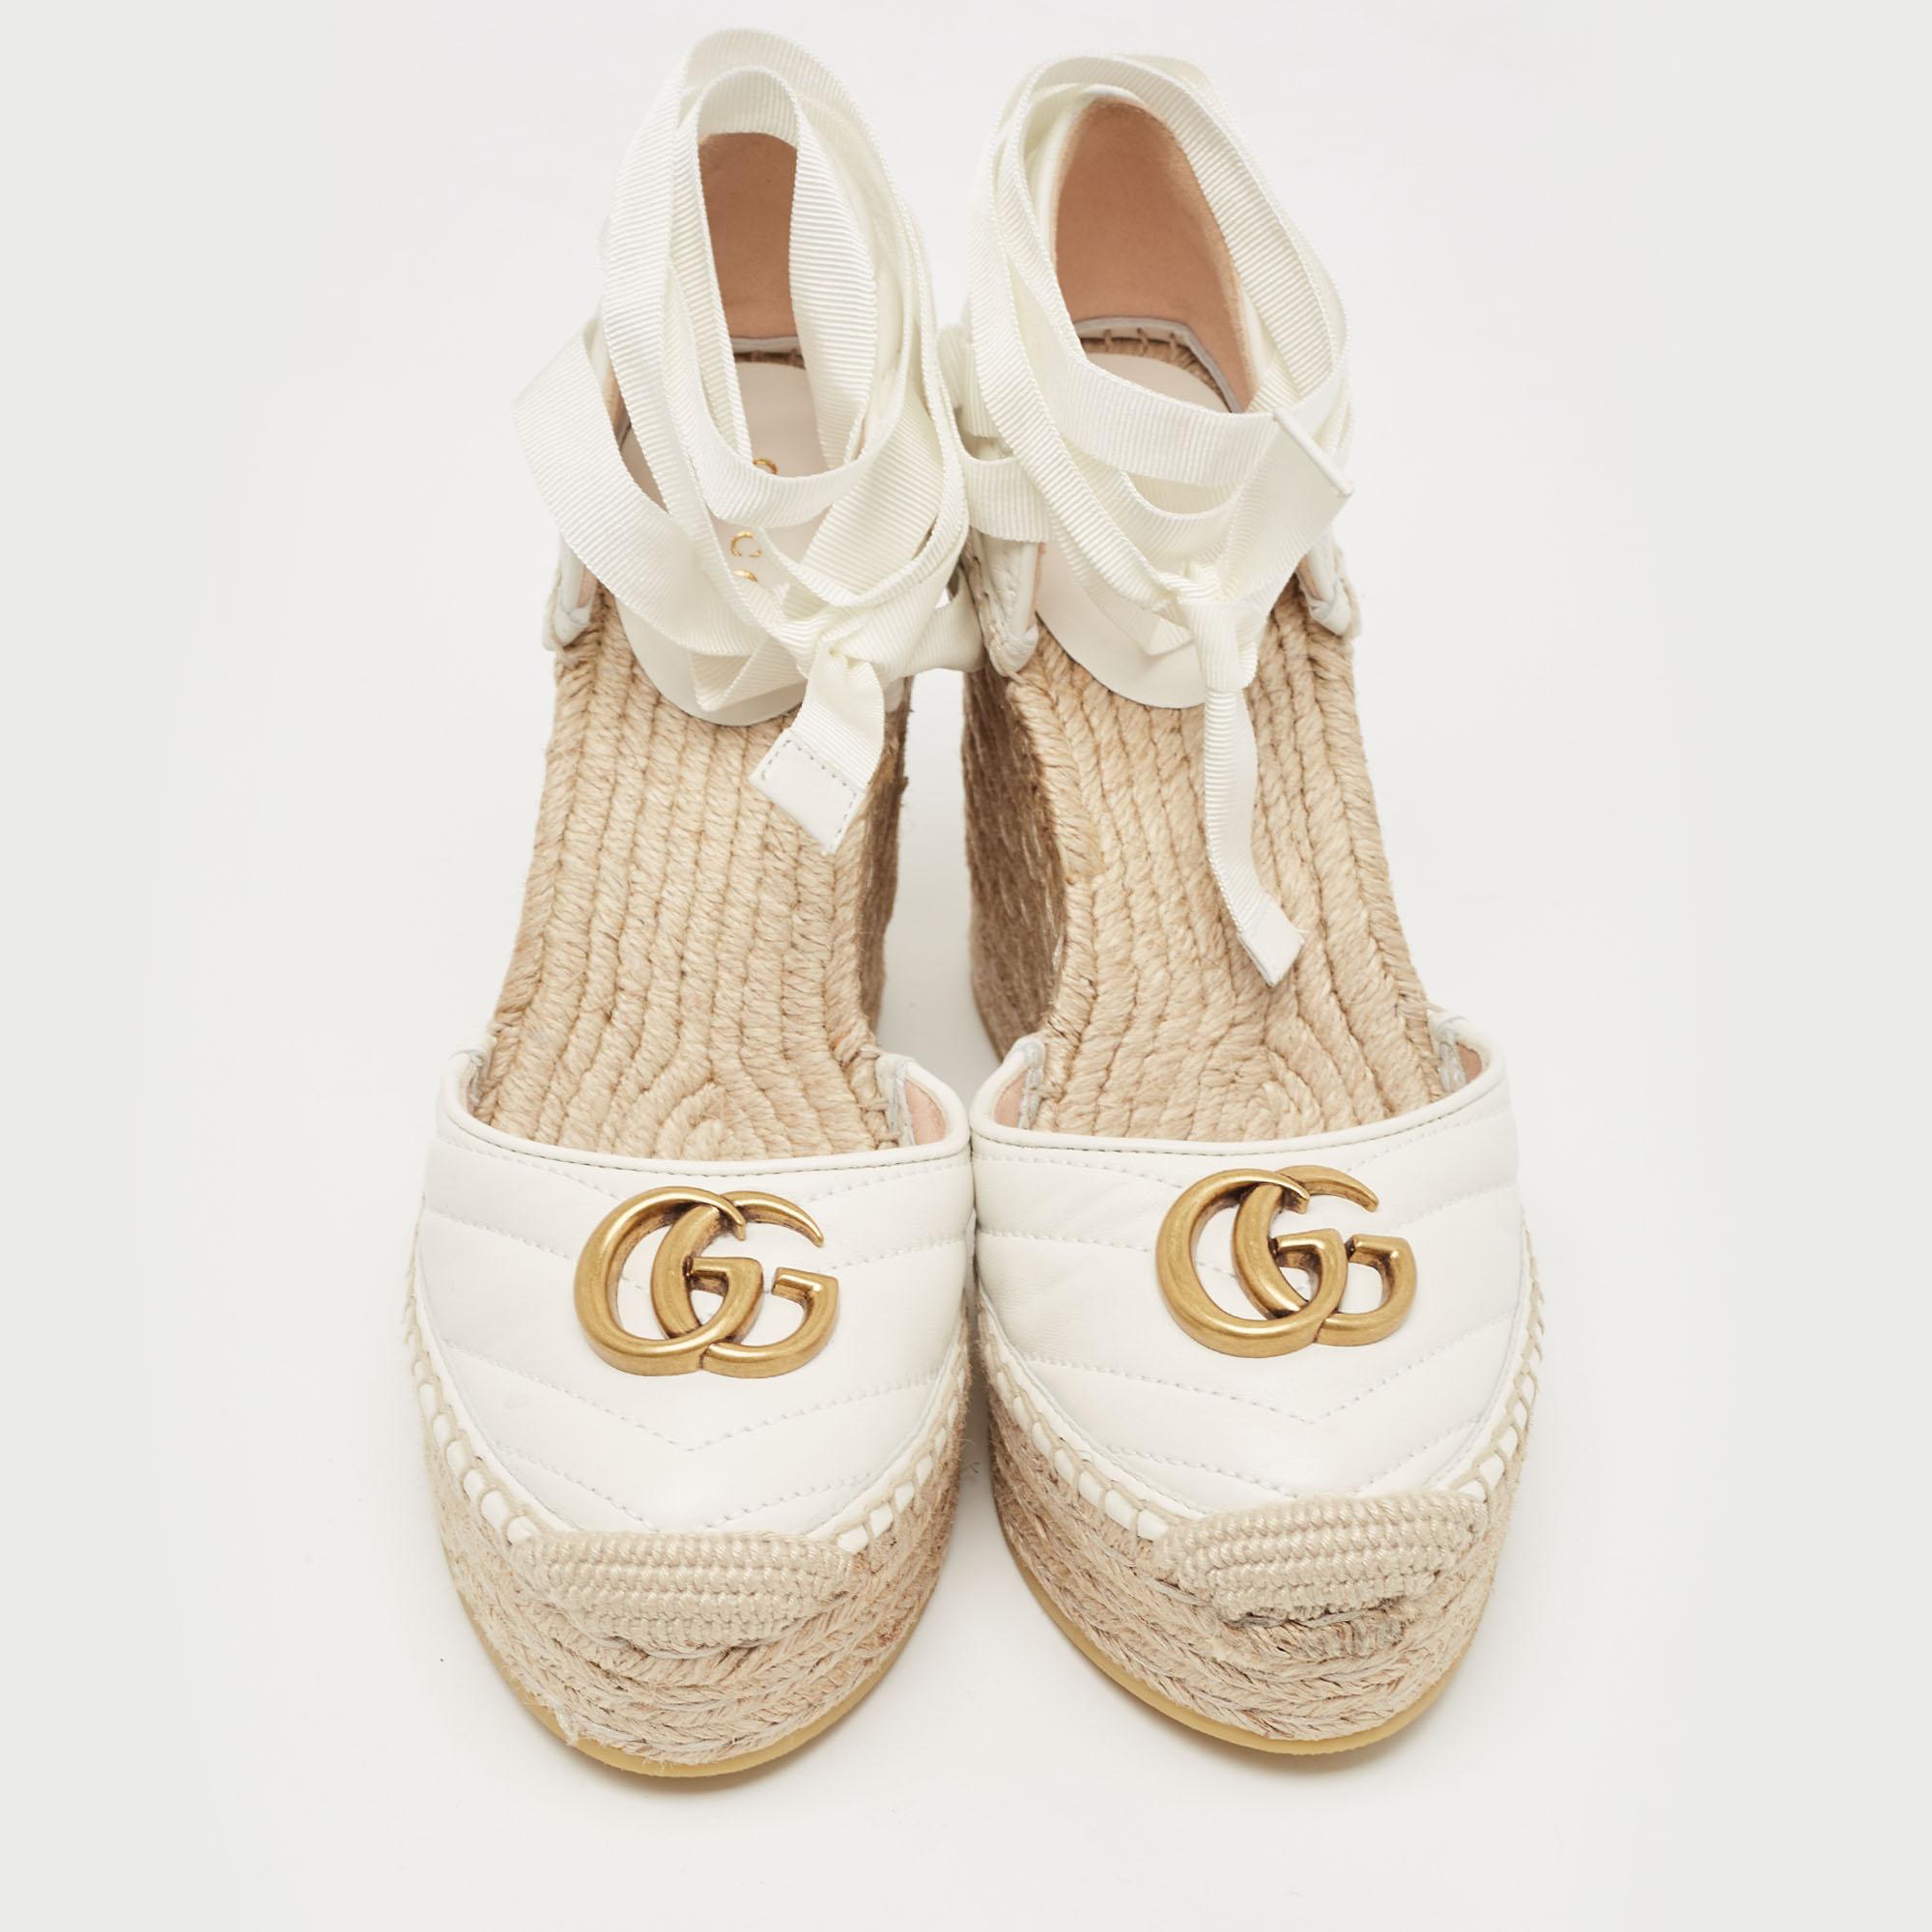 To elevate your style, Gucci brings you this pair of espadrilles that speak nothing but luxury. They've been crafted from leather and detailed with the GG logo on the uppers. The comfort-filled sandals are easy to wear and they are just the right